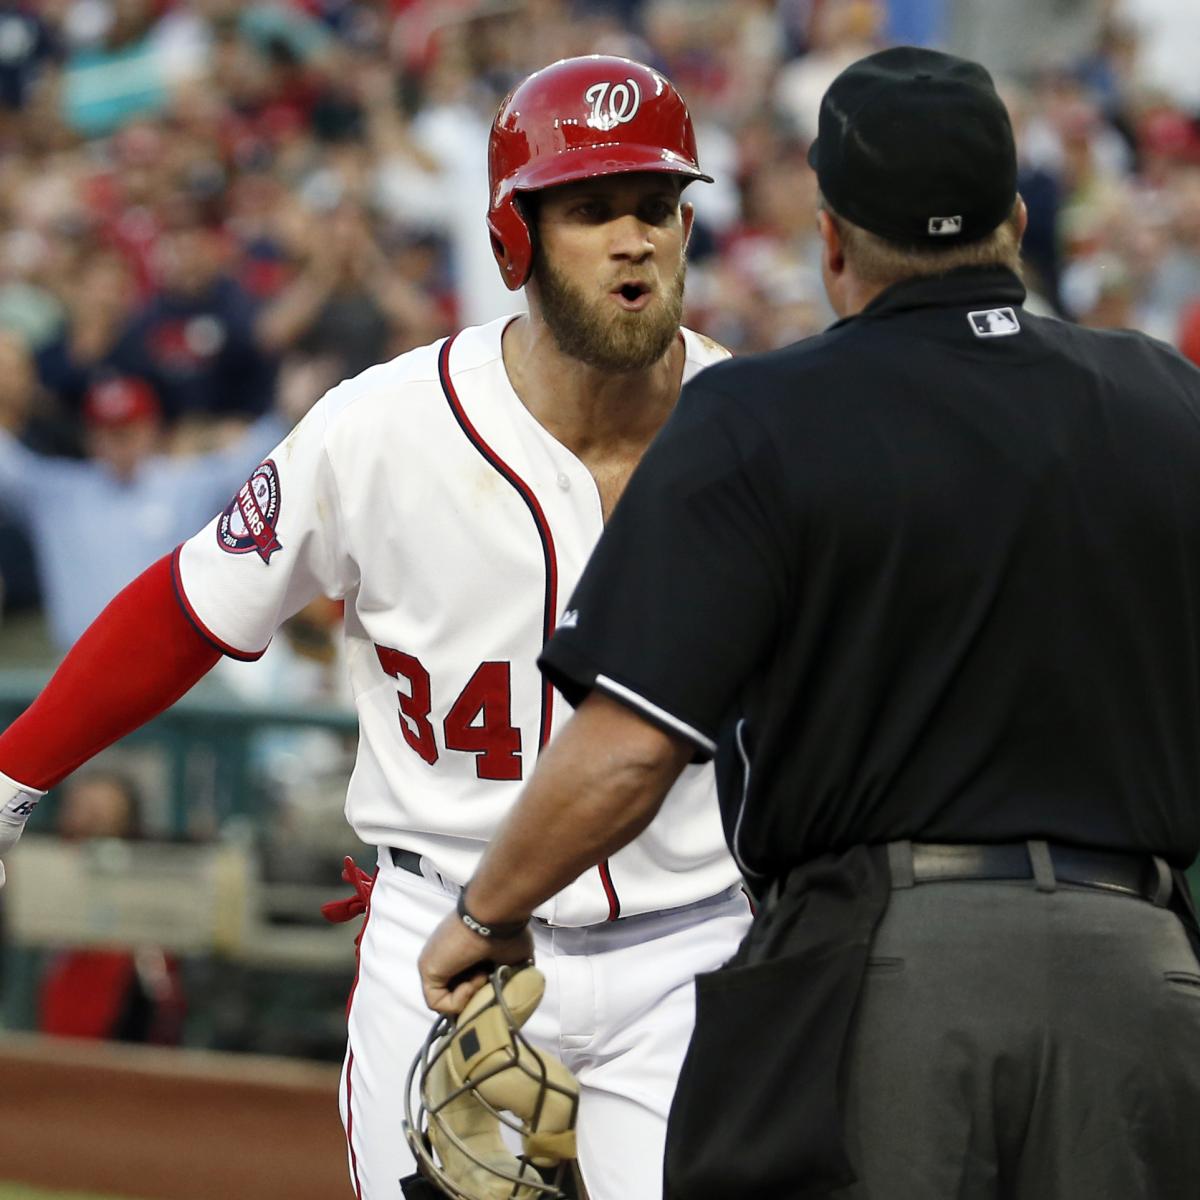 Bryce Harper was lucky to avoid an ejection after shouting at umpire